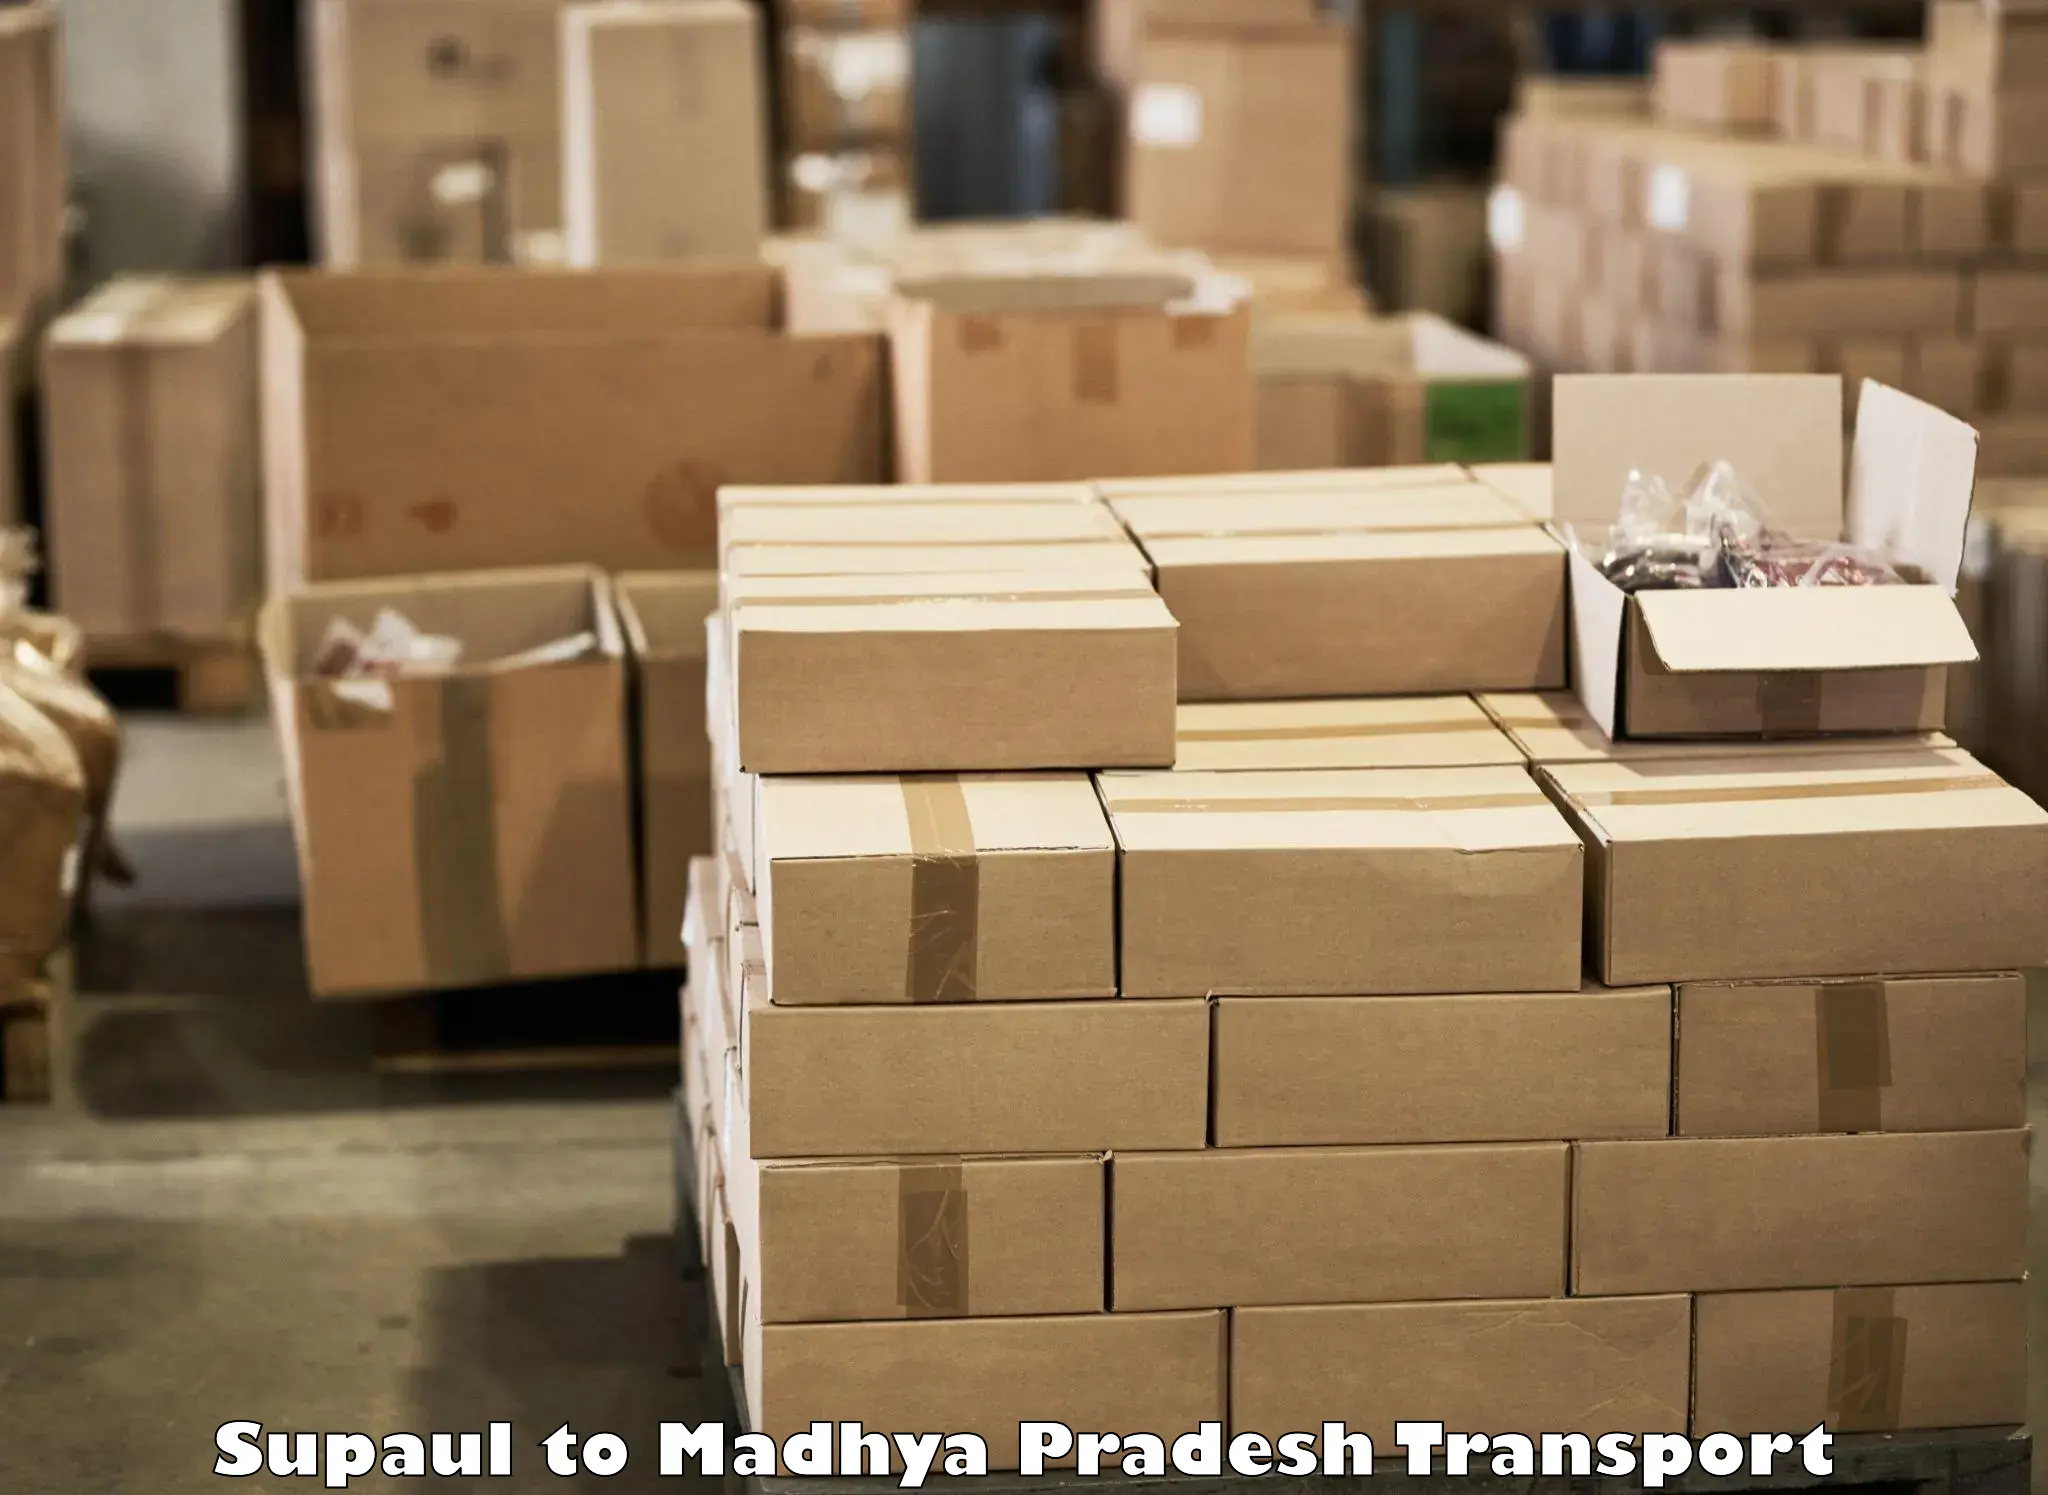 Container transport service Supaul to Chand Chaurai